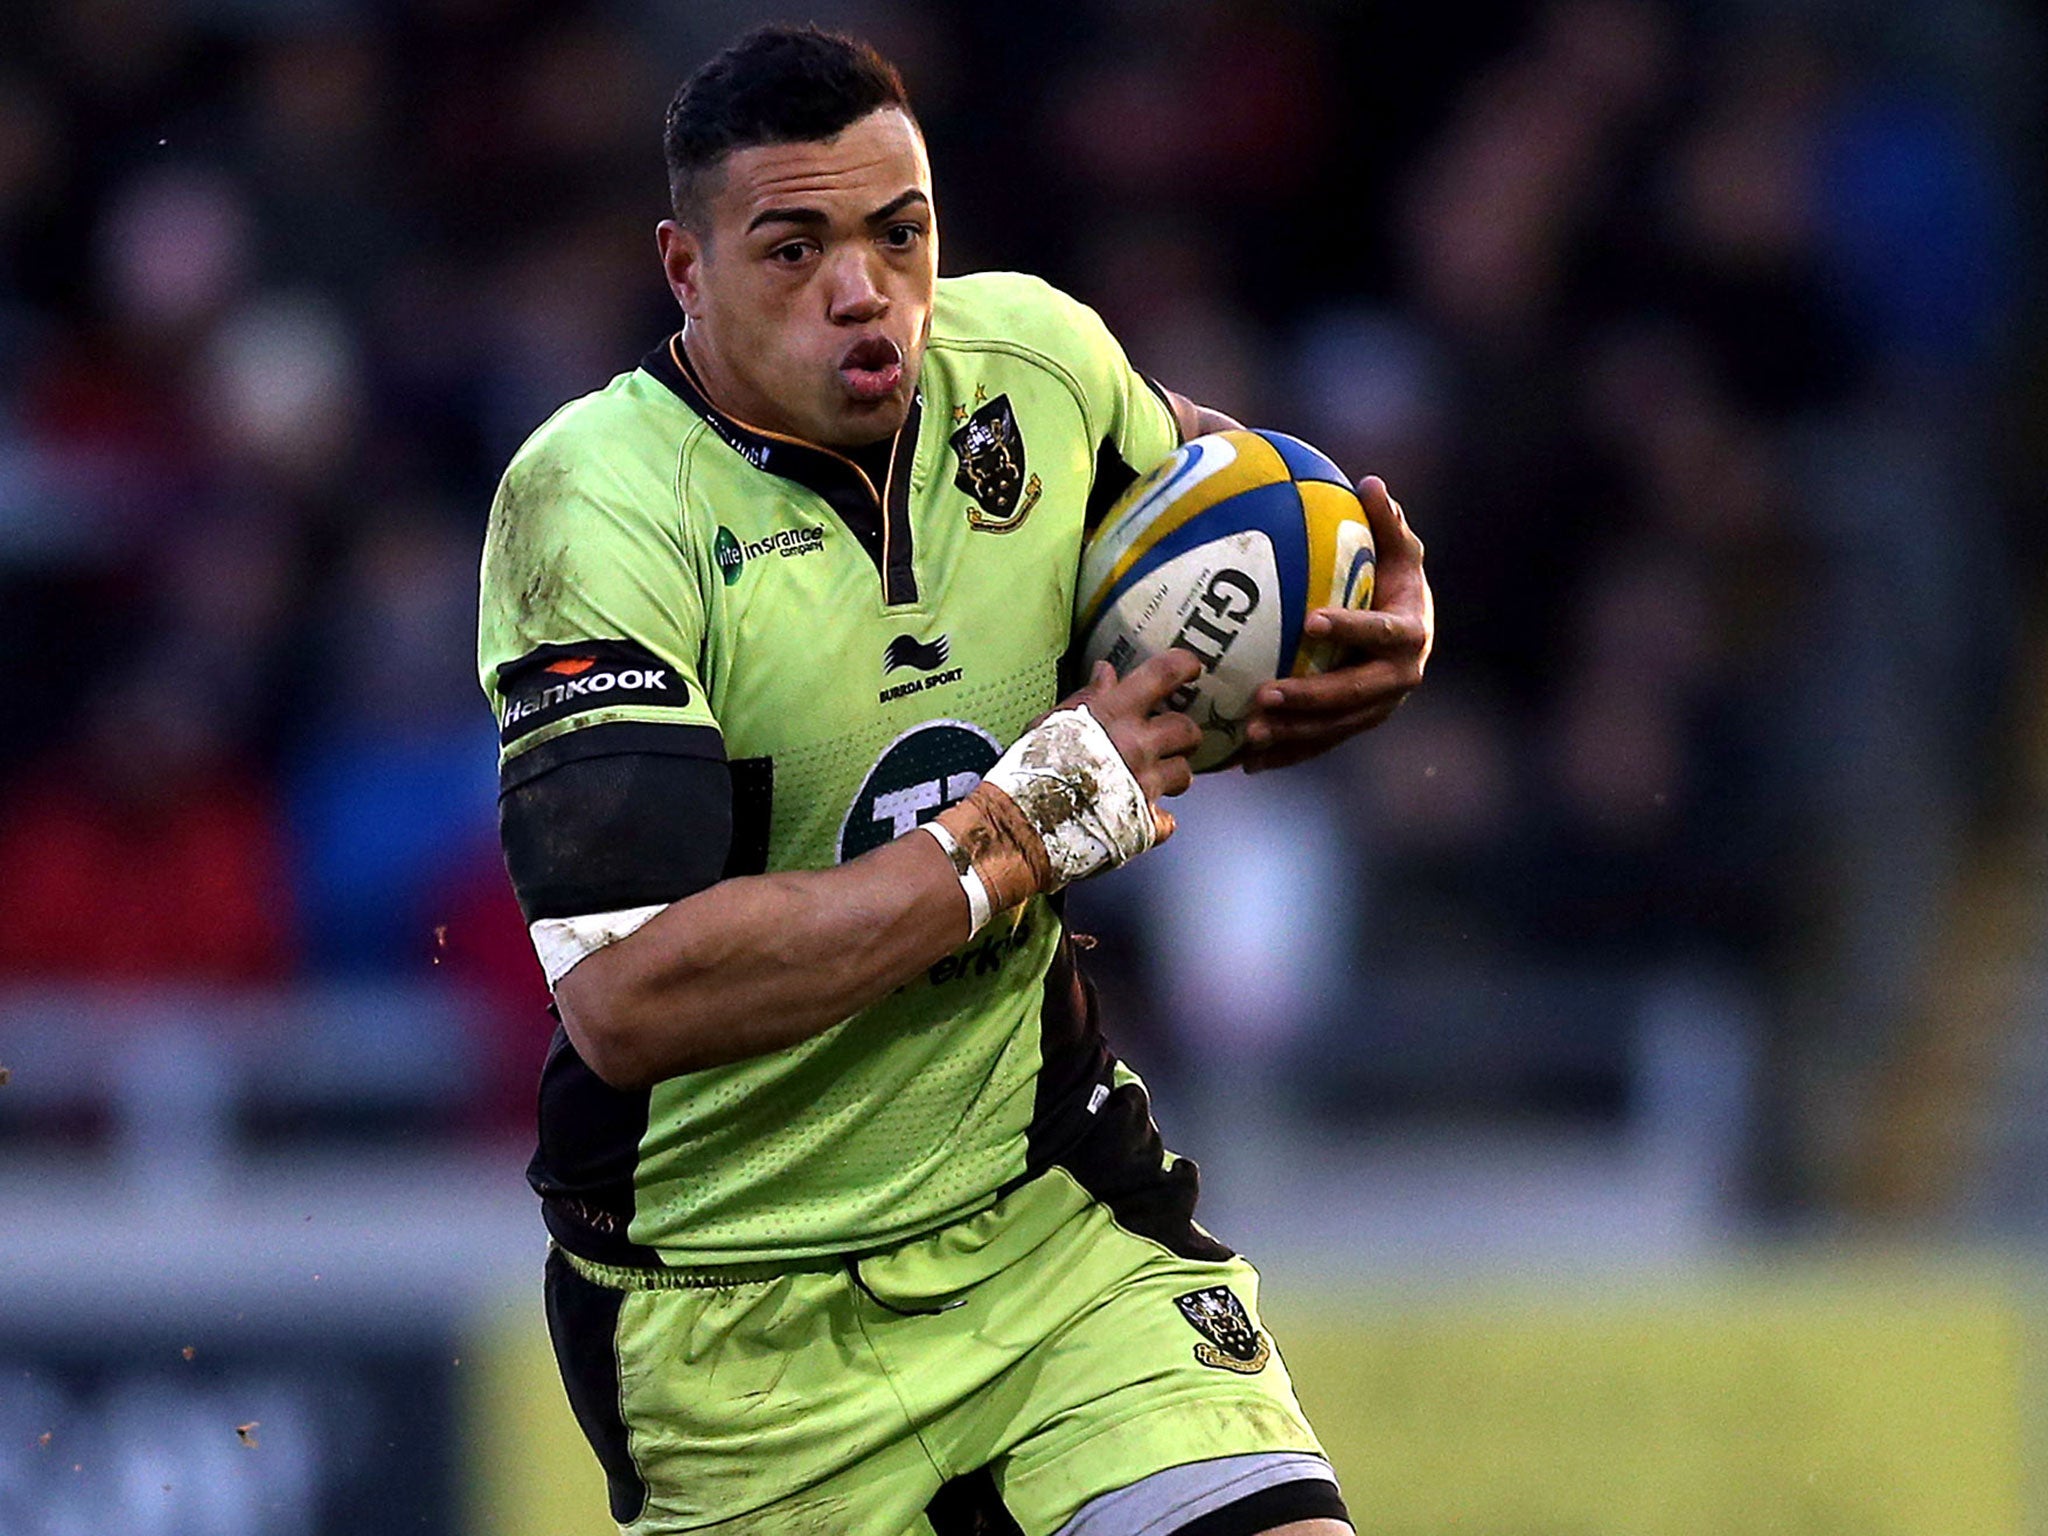 Middle man: Saints’ centre Luther Burrell shows his power on the break